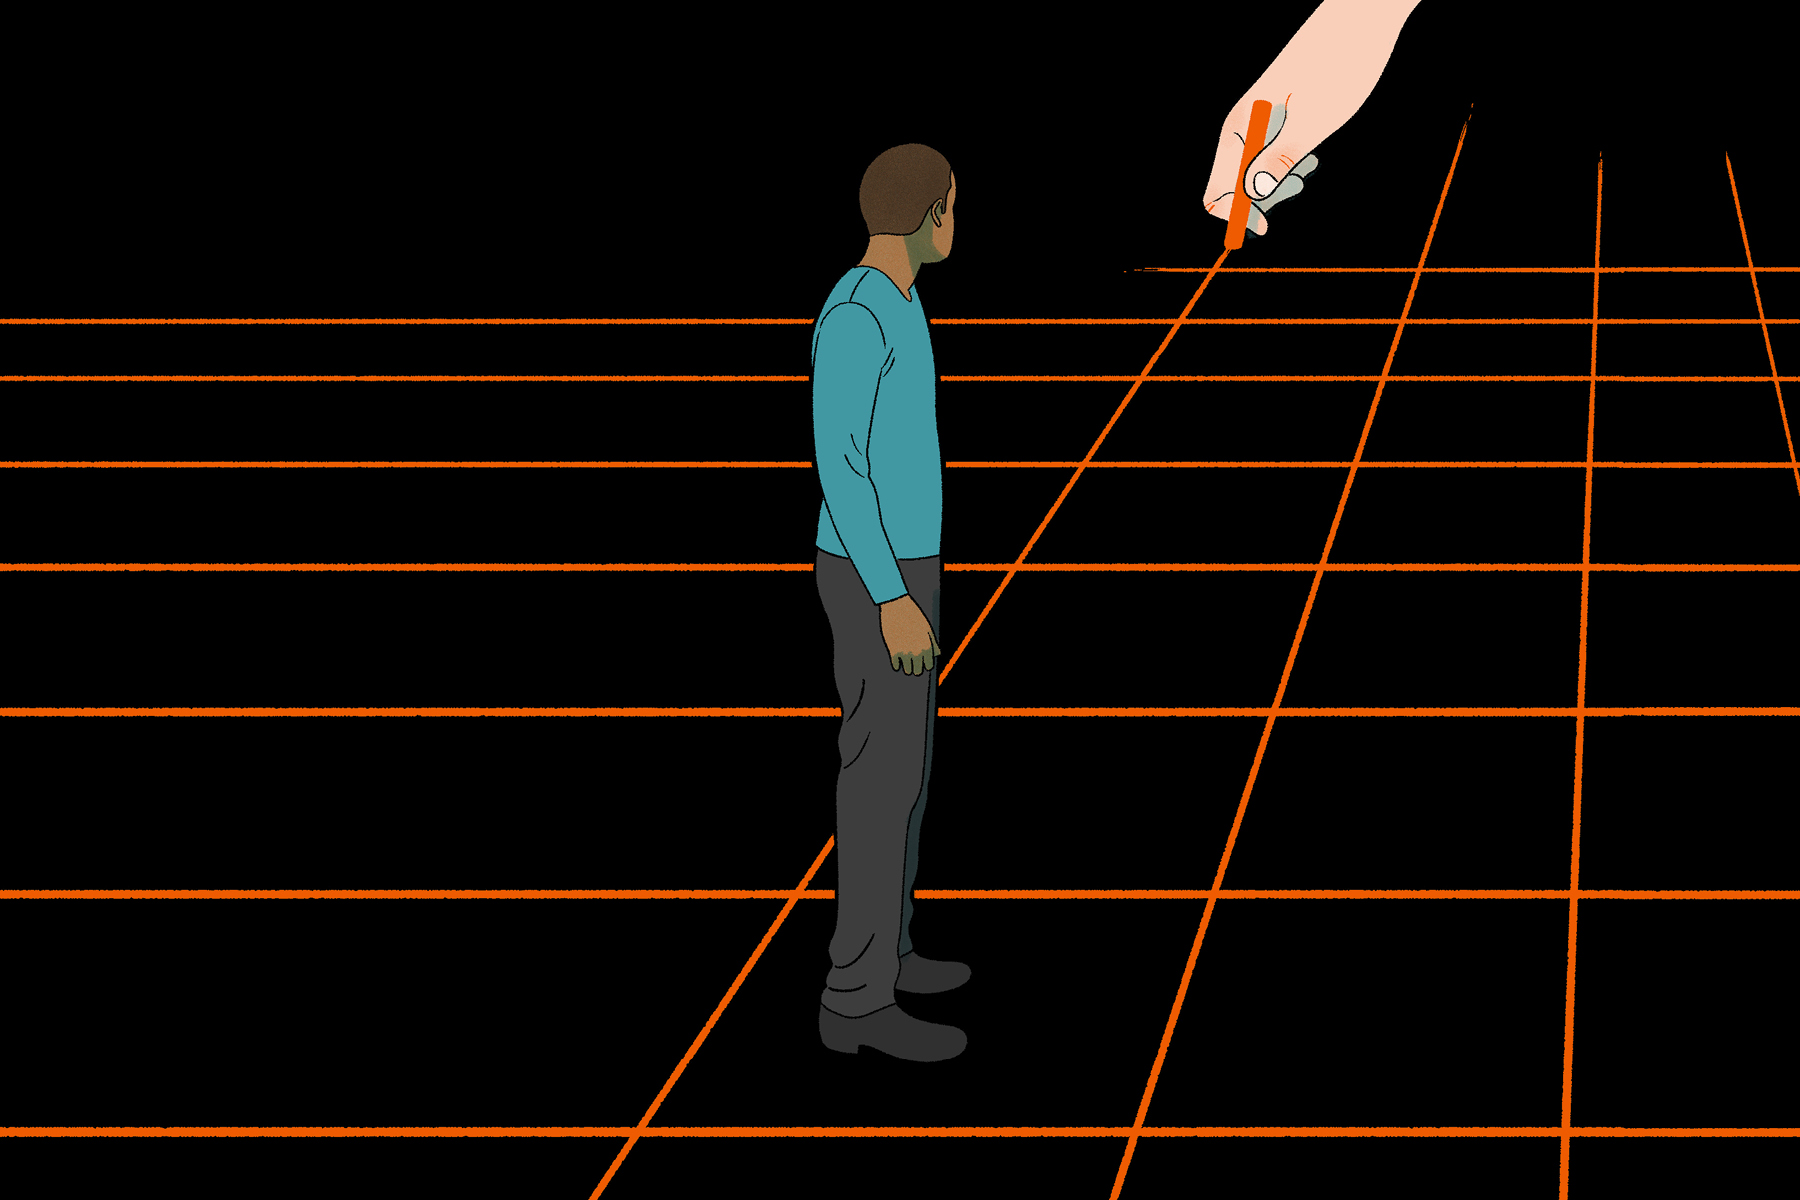 An illustration of a Black man trapped on a grid, drawn by a white hand.